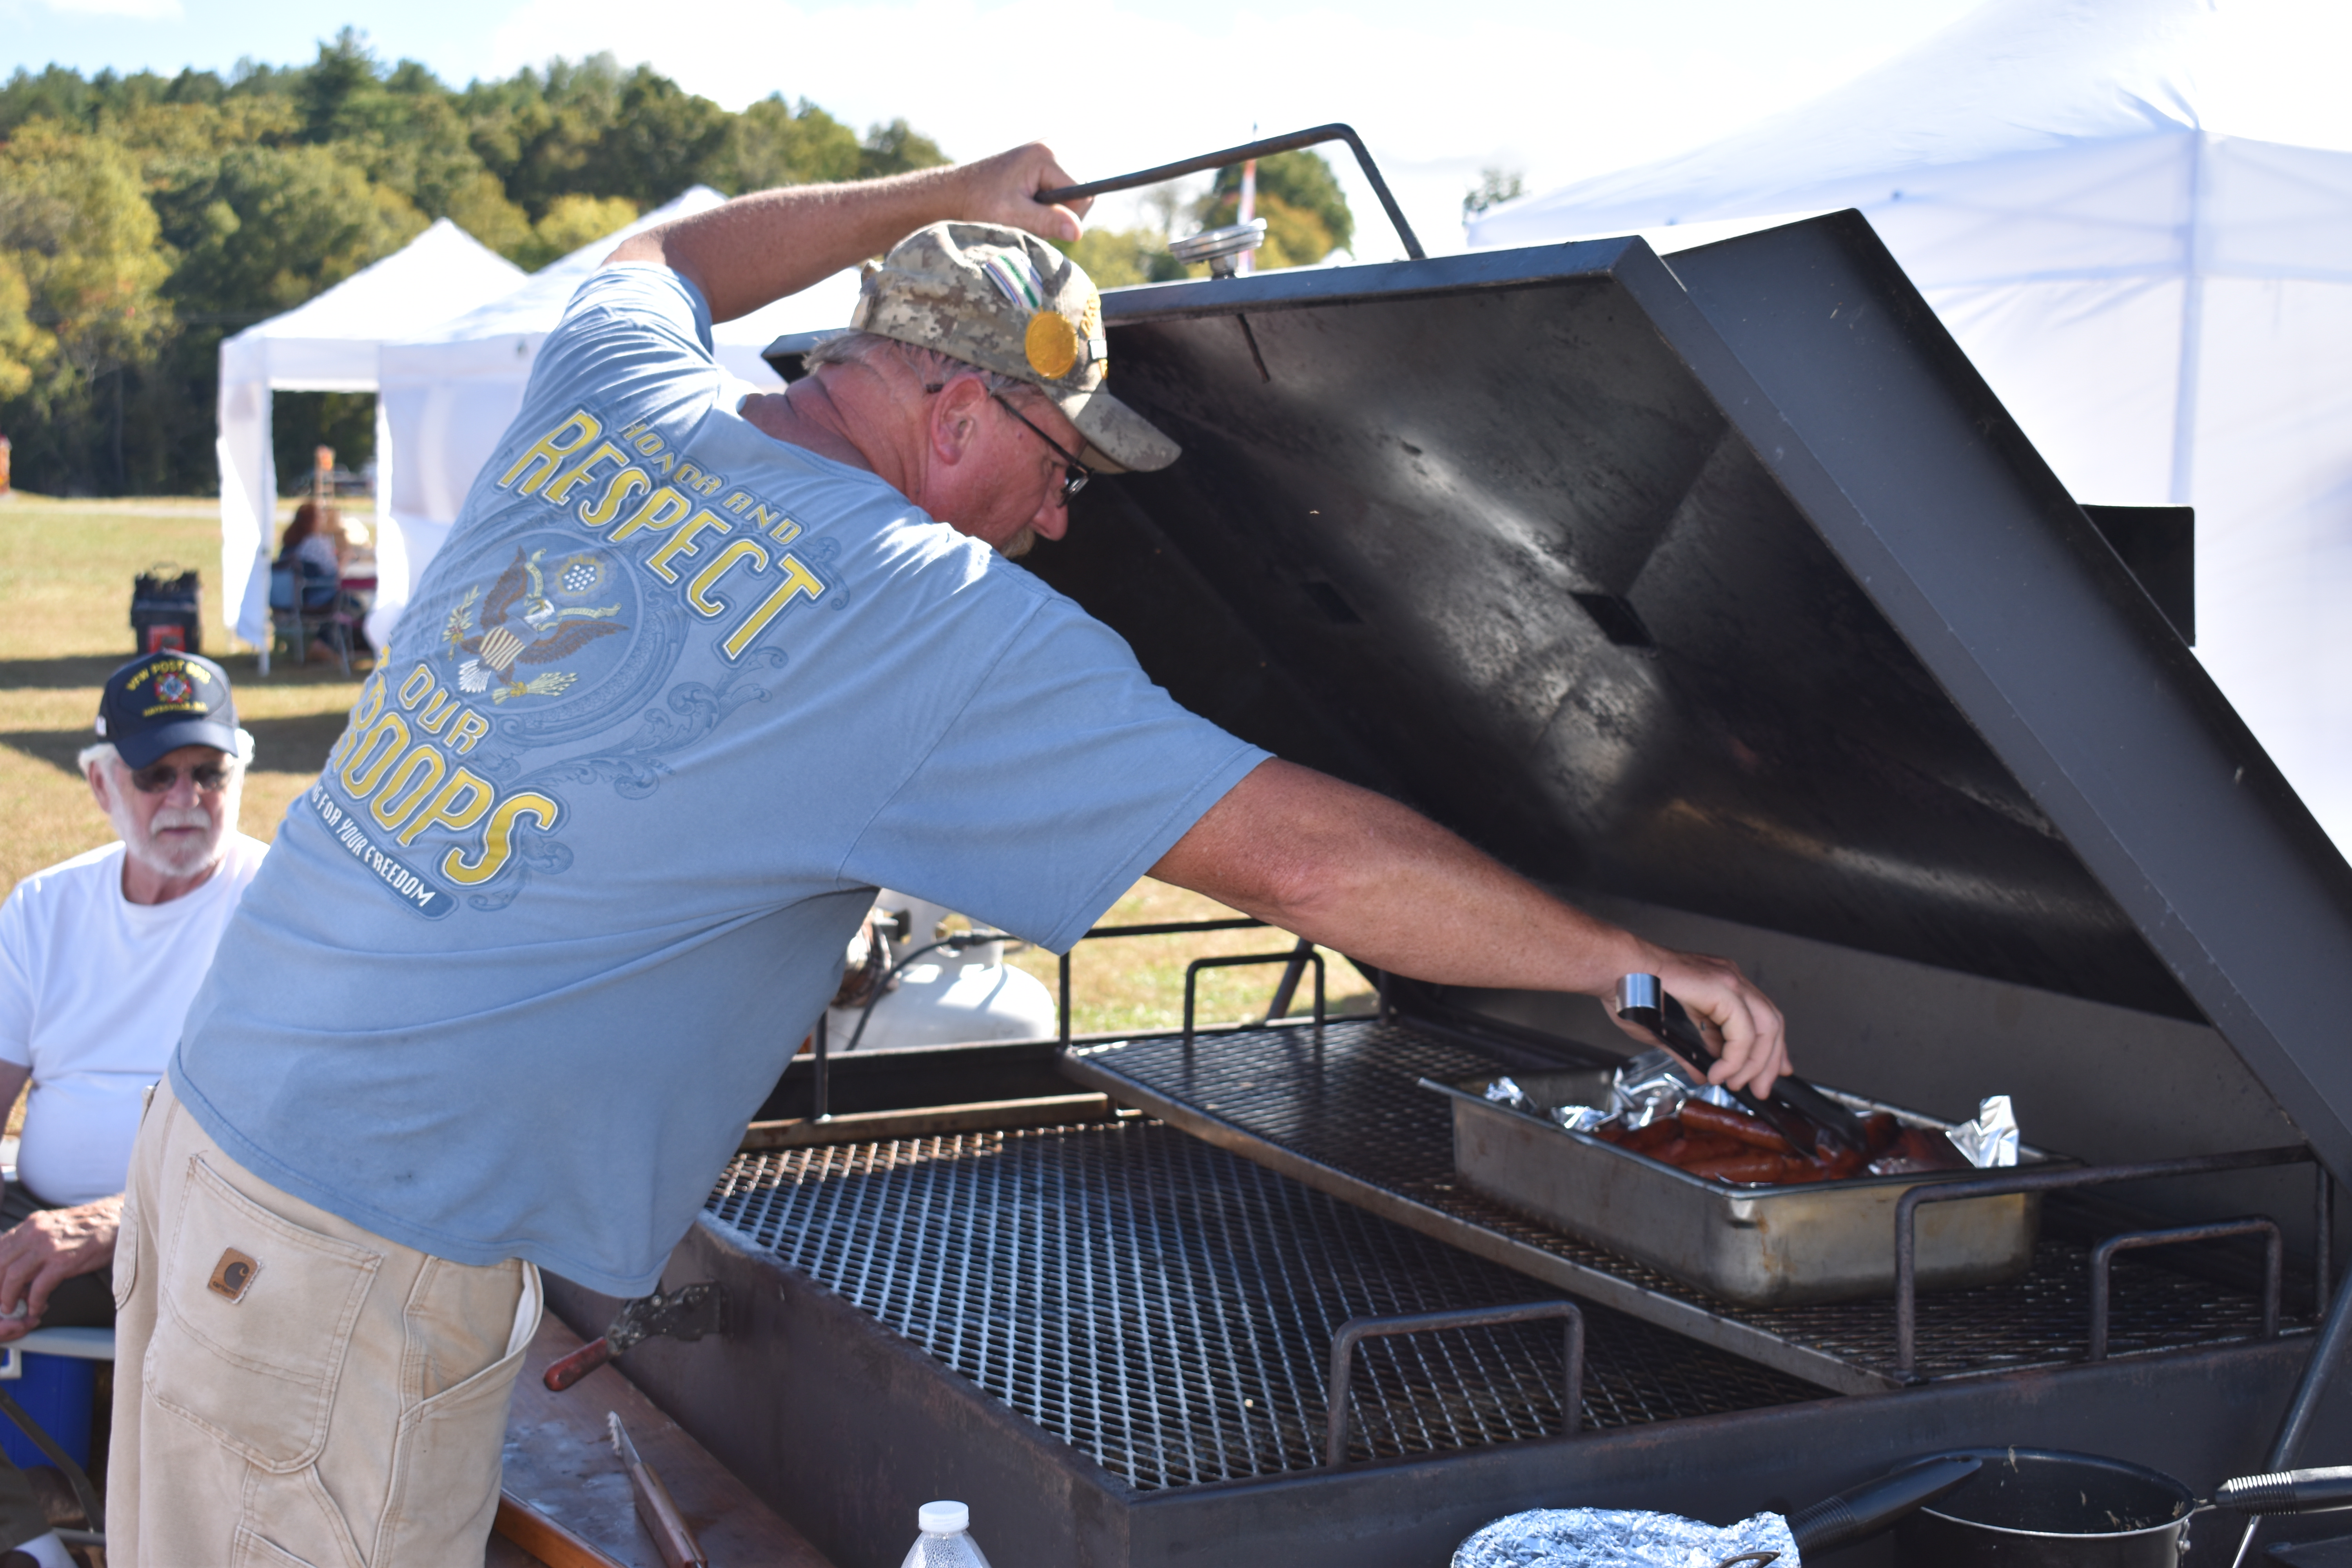 Tom Lyvers keeps the grilled hotdogs hot and ready during the festival.